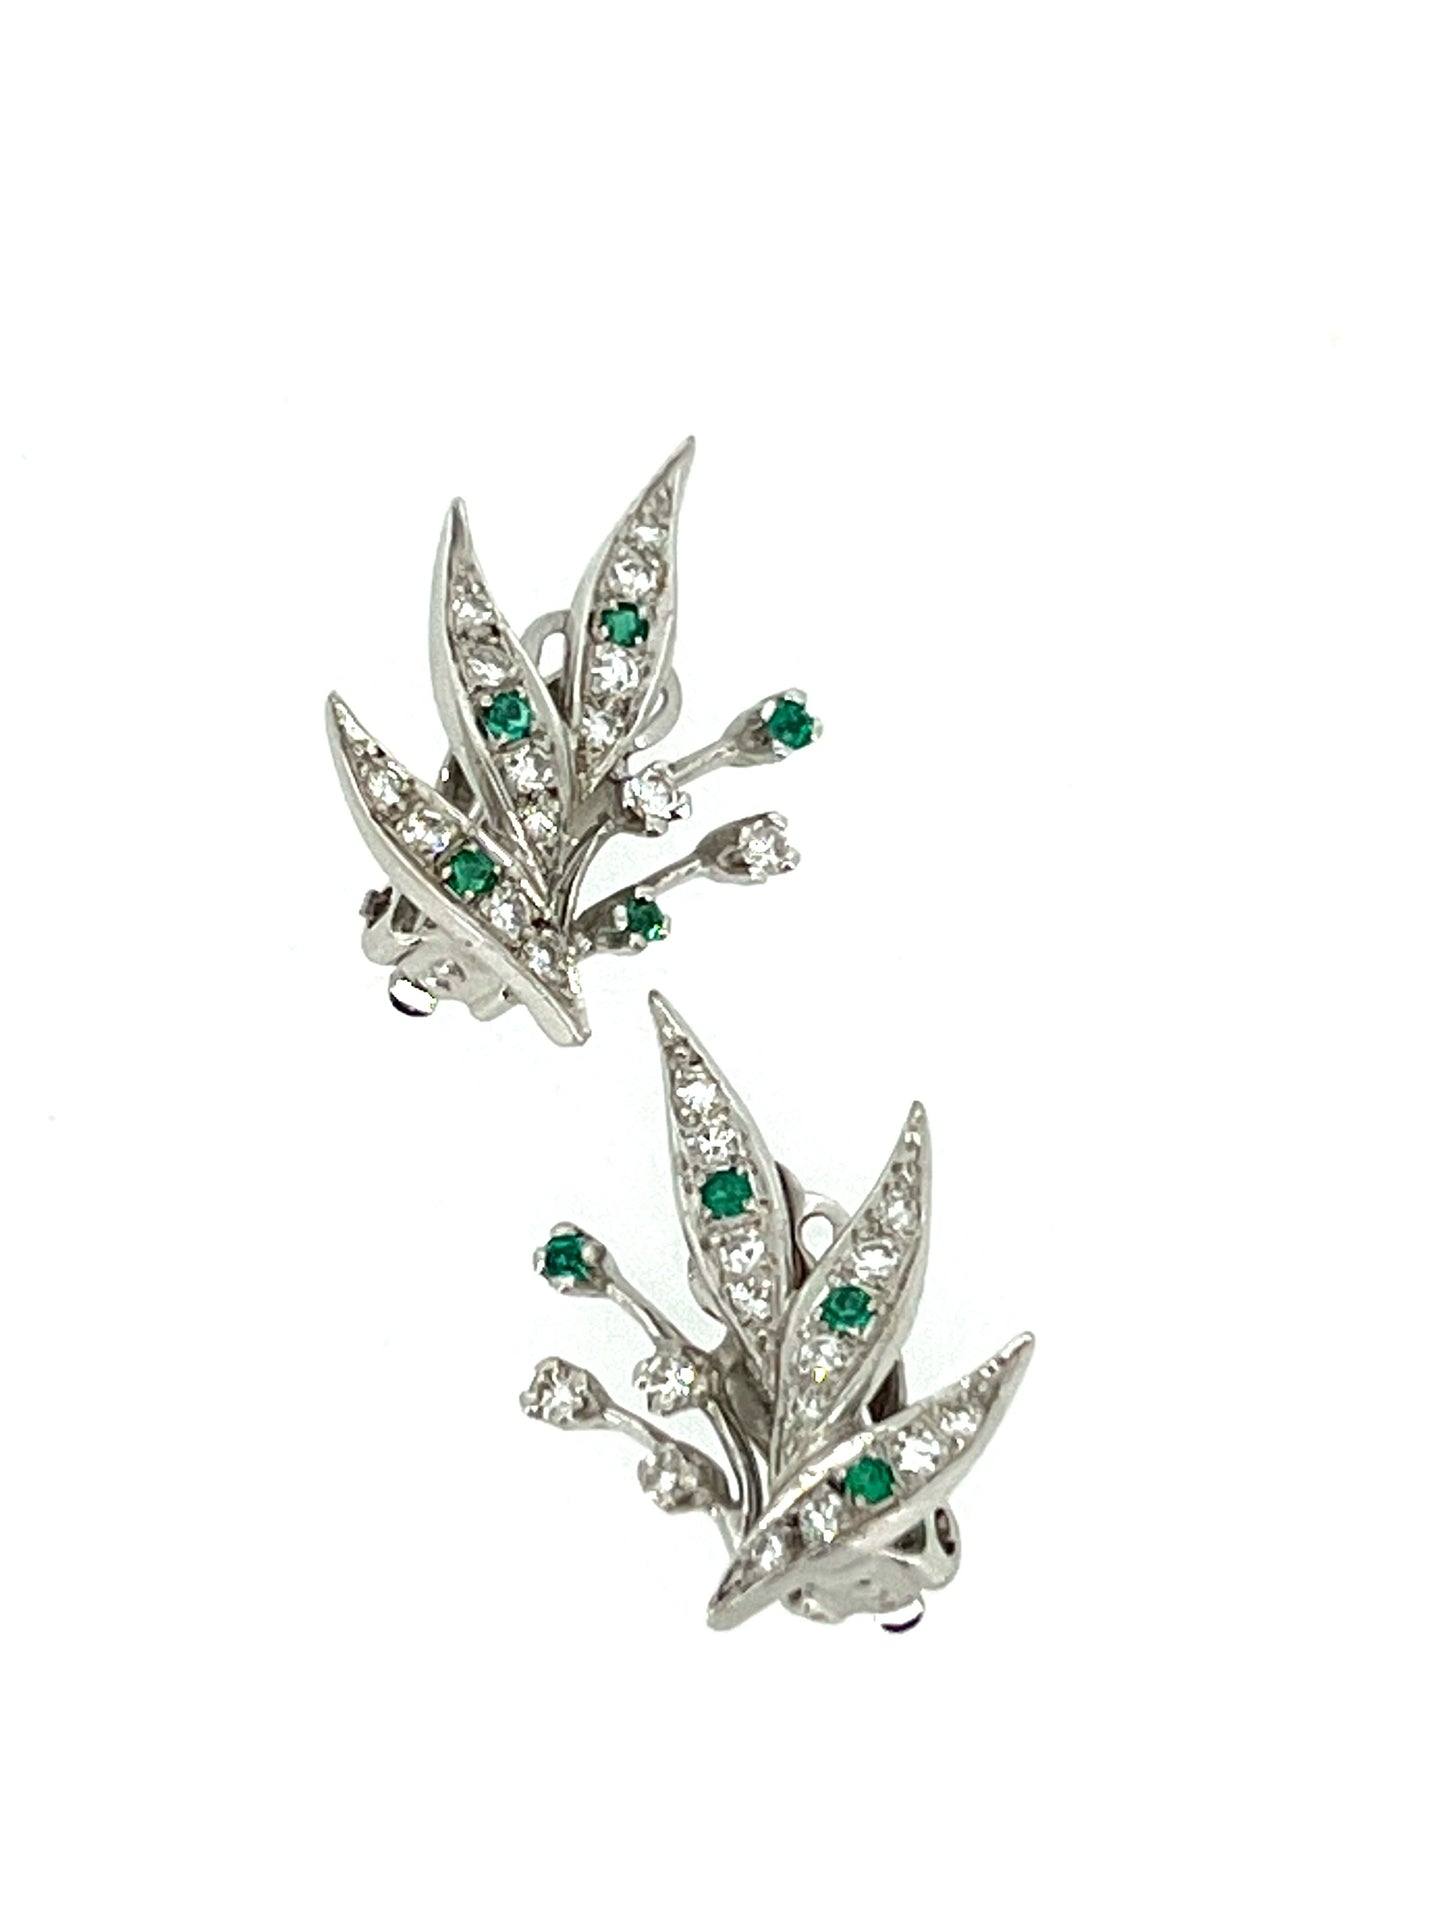 Modern 14K white gold diamond and emerald clip earrings in a botanical style